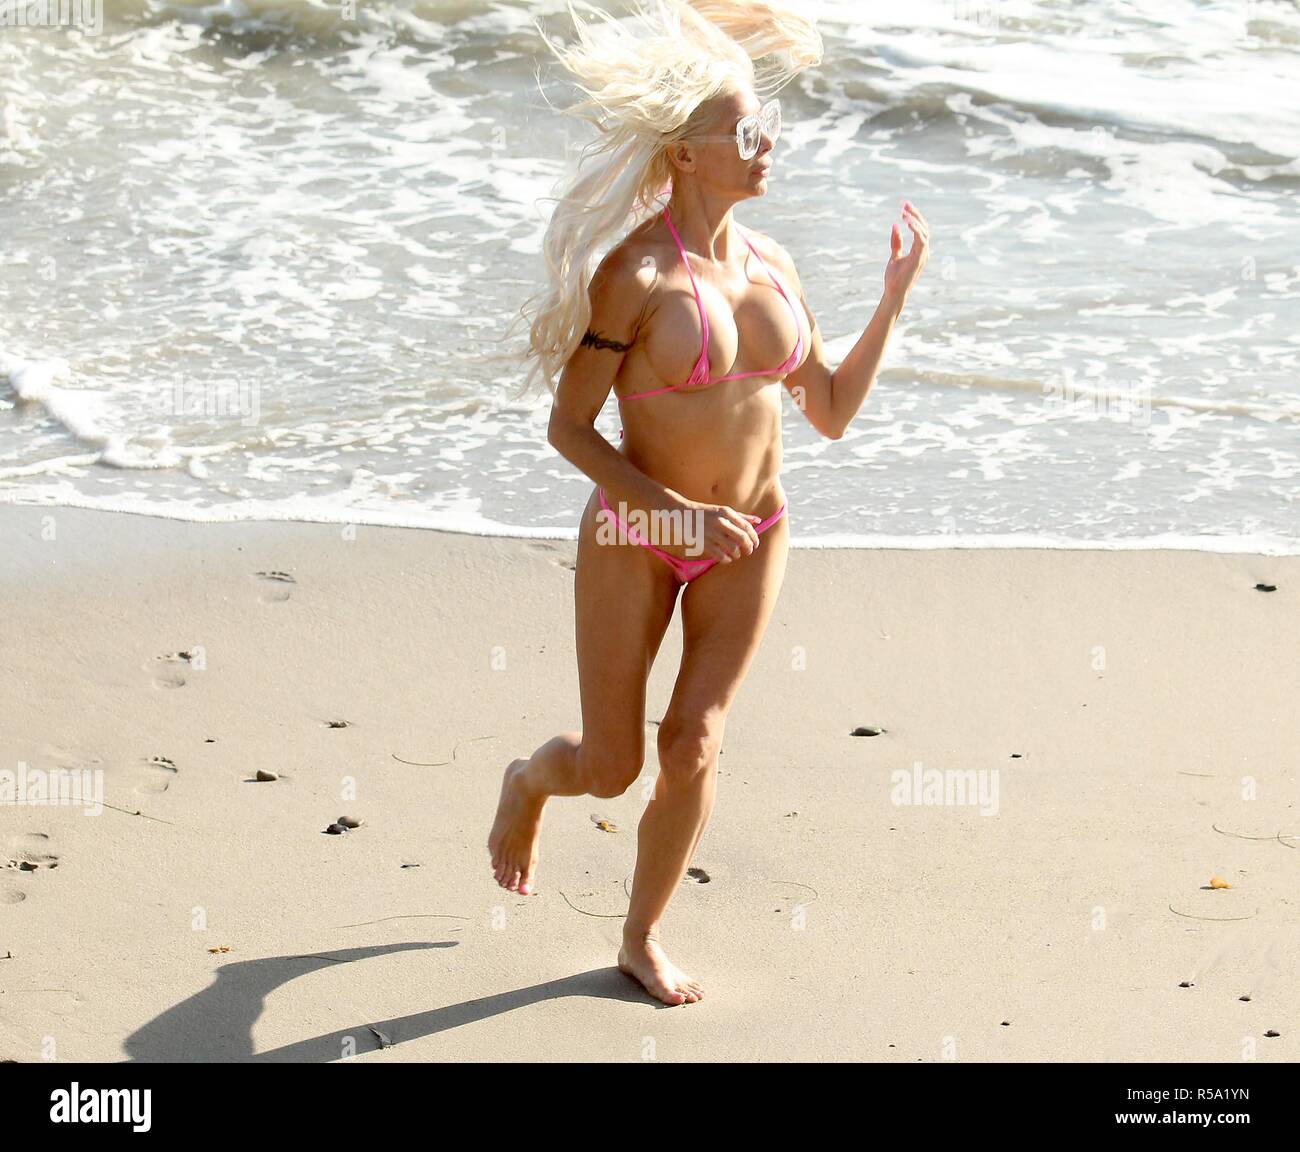 Celebrity Big Brother' star Frenchy Morgan wearing a tiny bikini while  jogging on the beach in